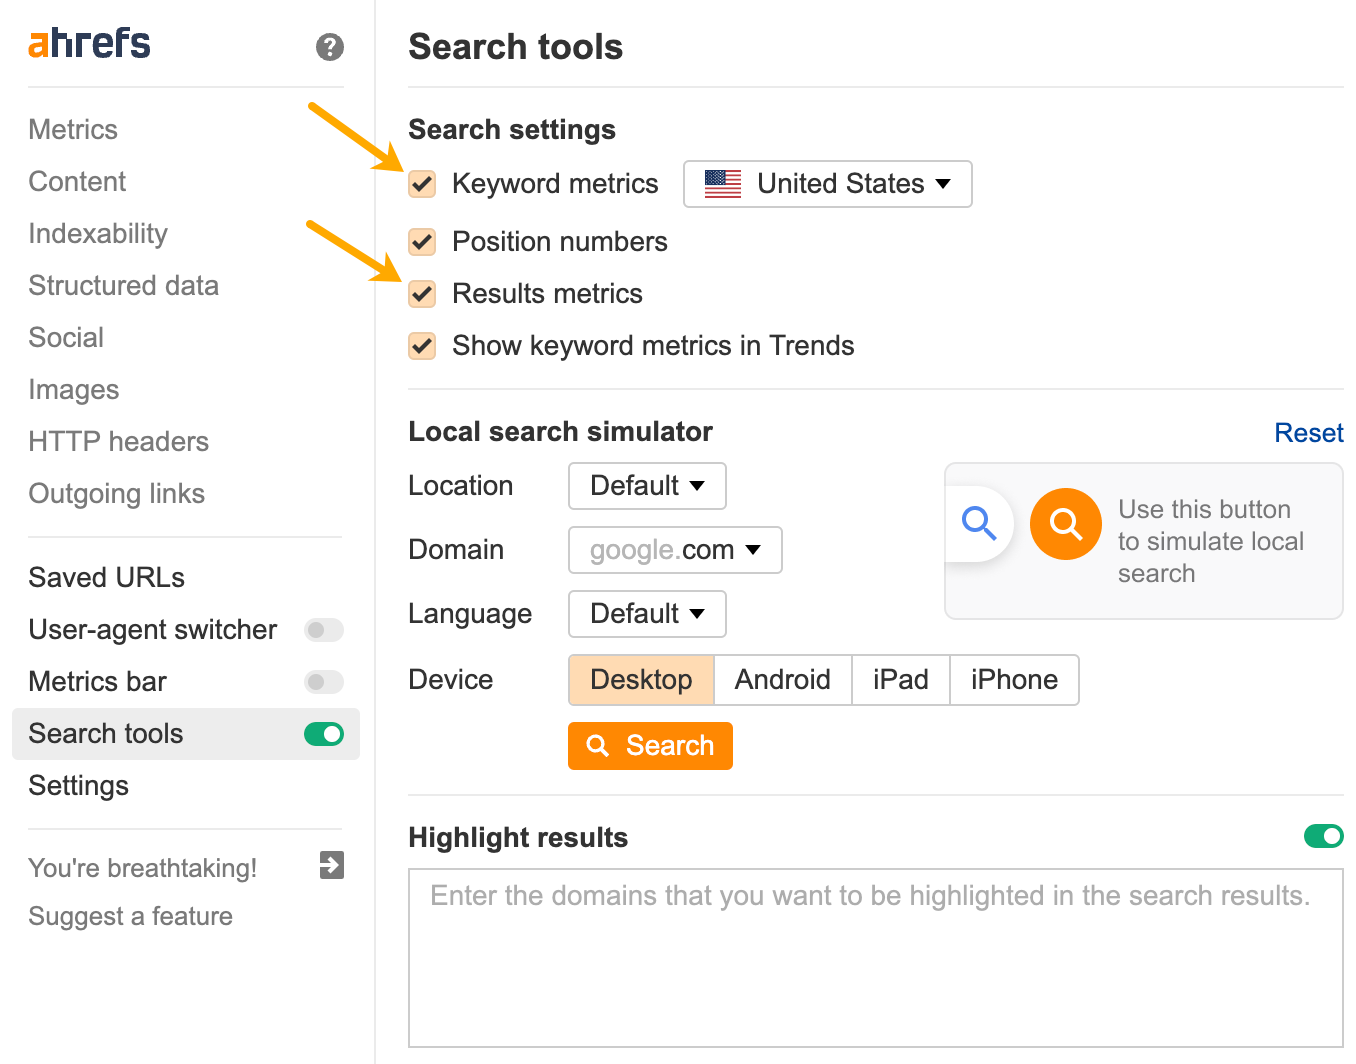 How to use toolbar: Search tools settings